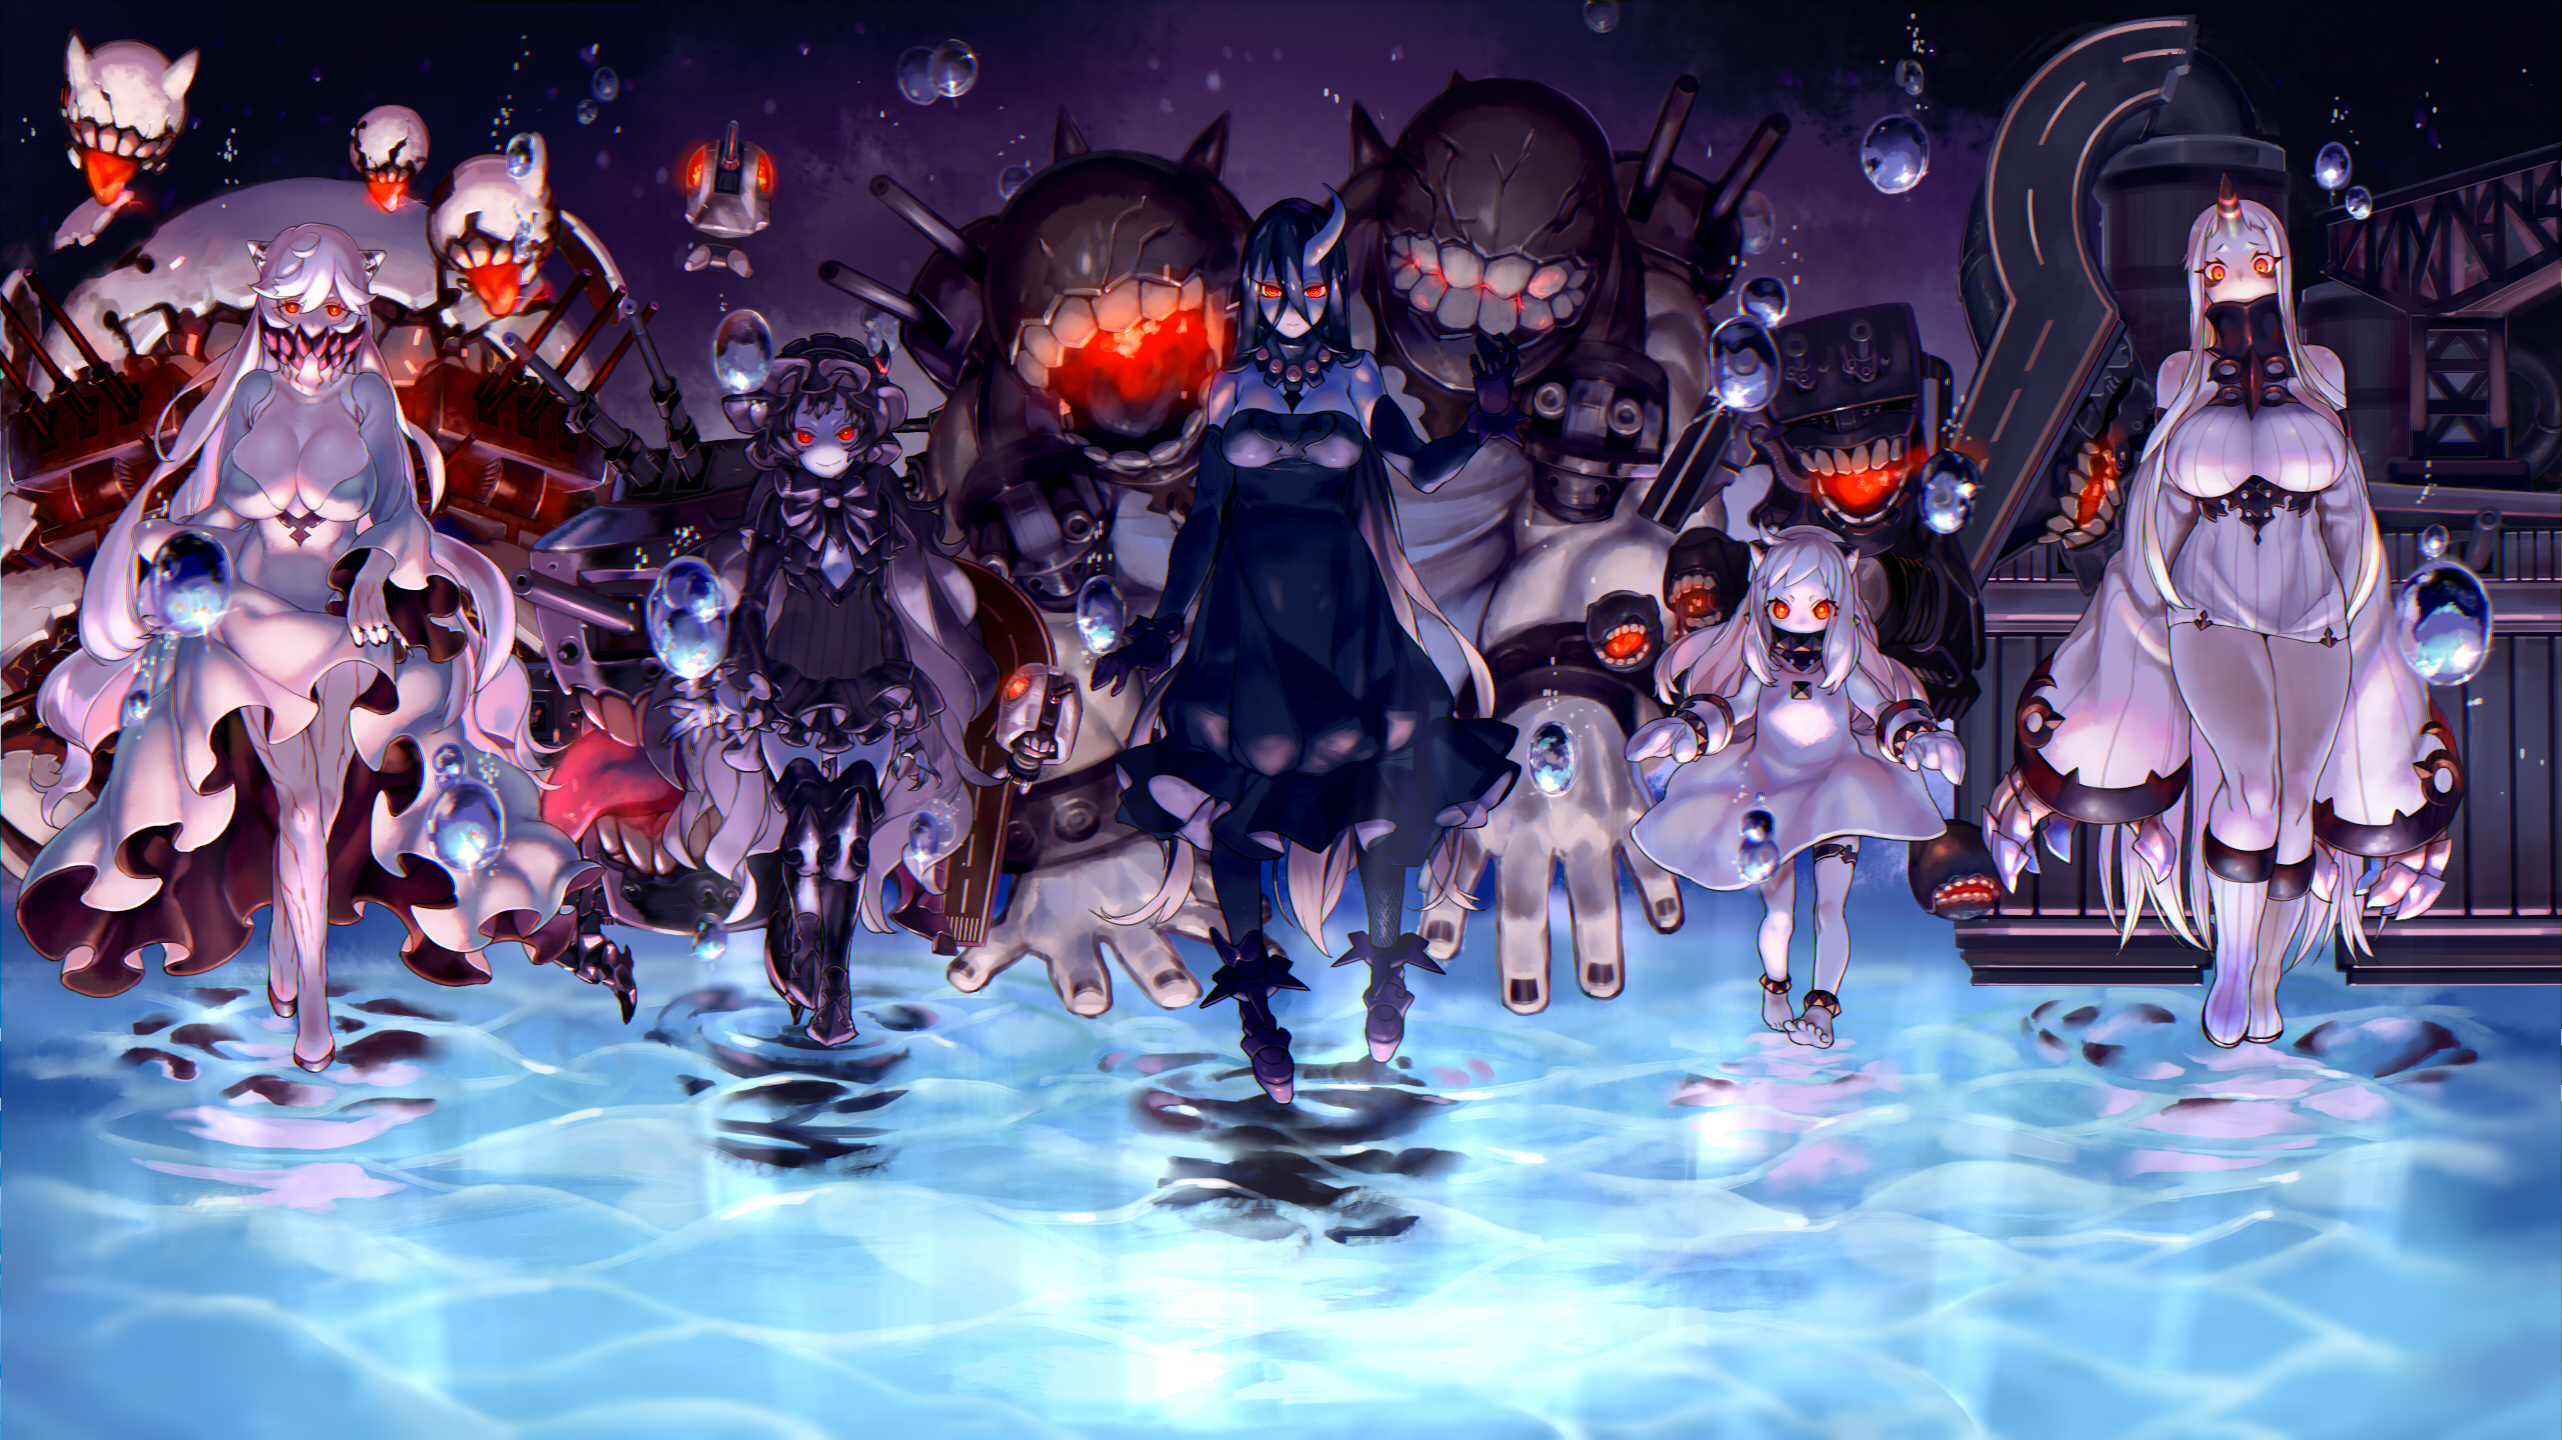 Kantai Collection Northern Ocean Hime Seaport Hime KanColle Isolated Island Oni Midway Hime Battlesh 2562x1440